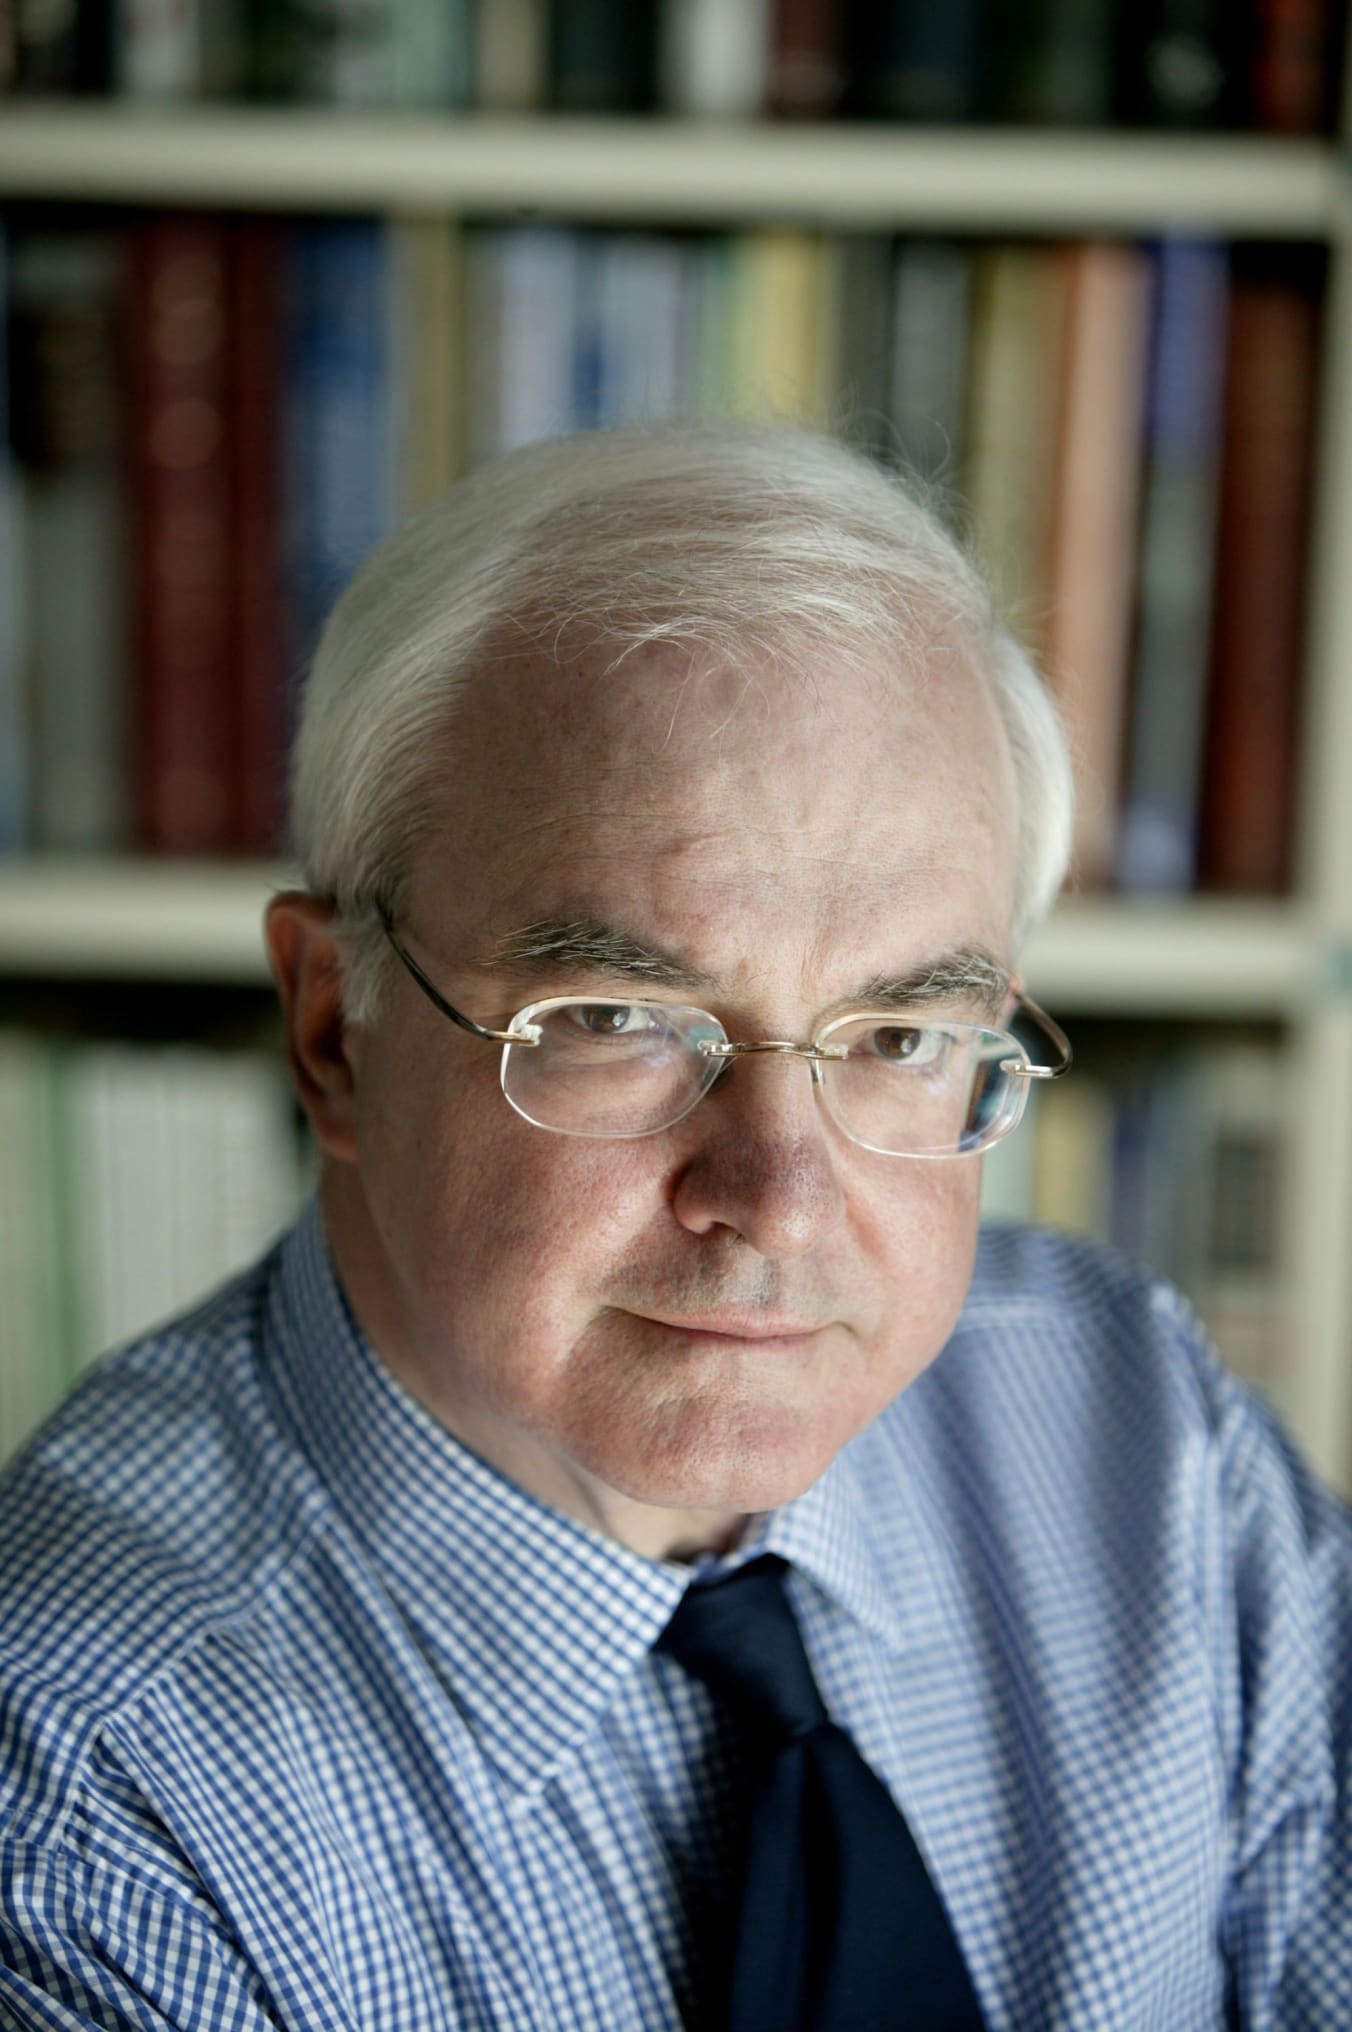 This is a photograph of Magnus Linklater. He is wearing glasses, a blue shirt and navy tie. He is pictured seated with a bookcase behind him.